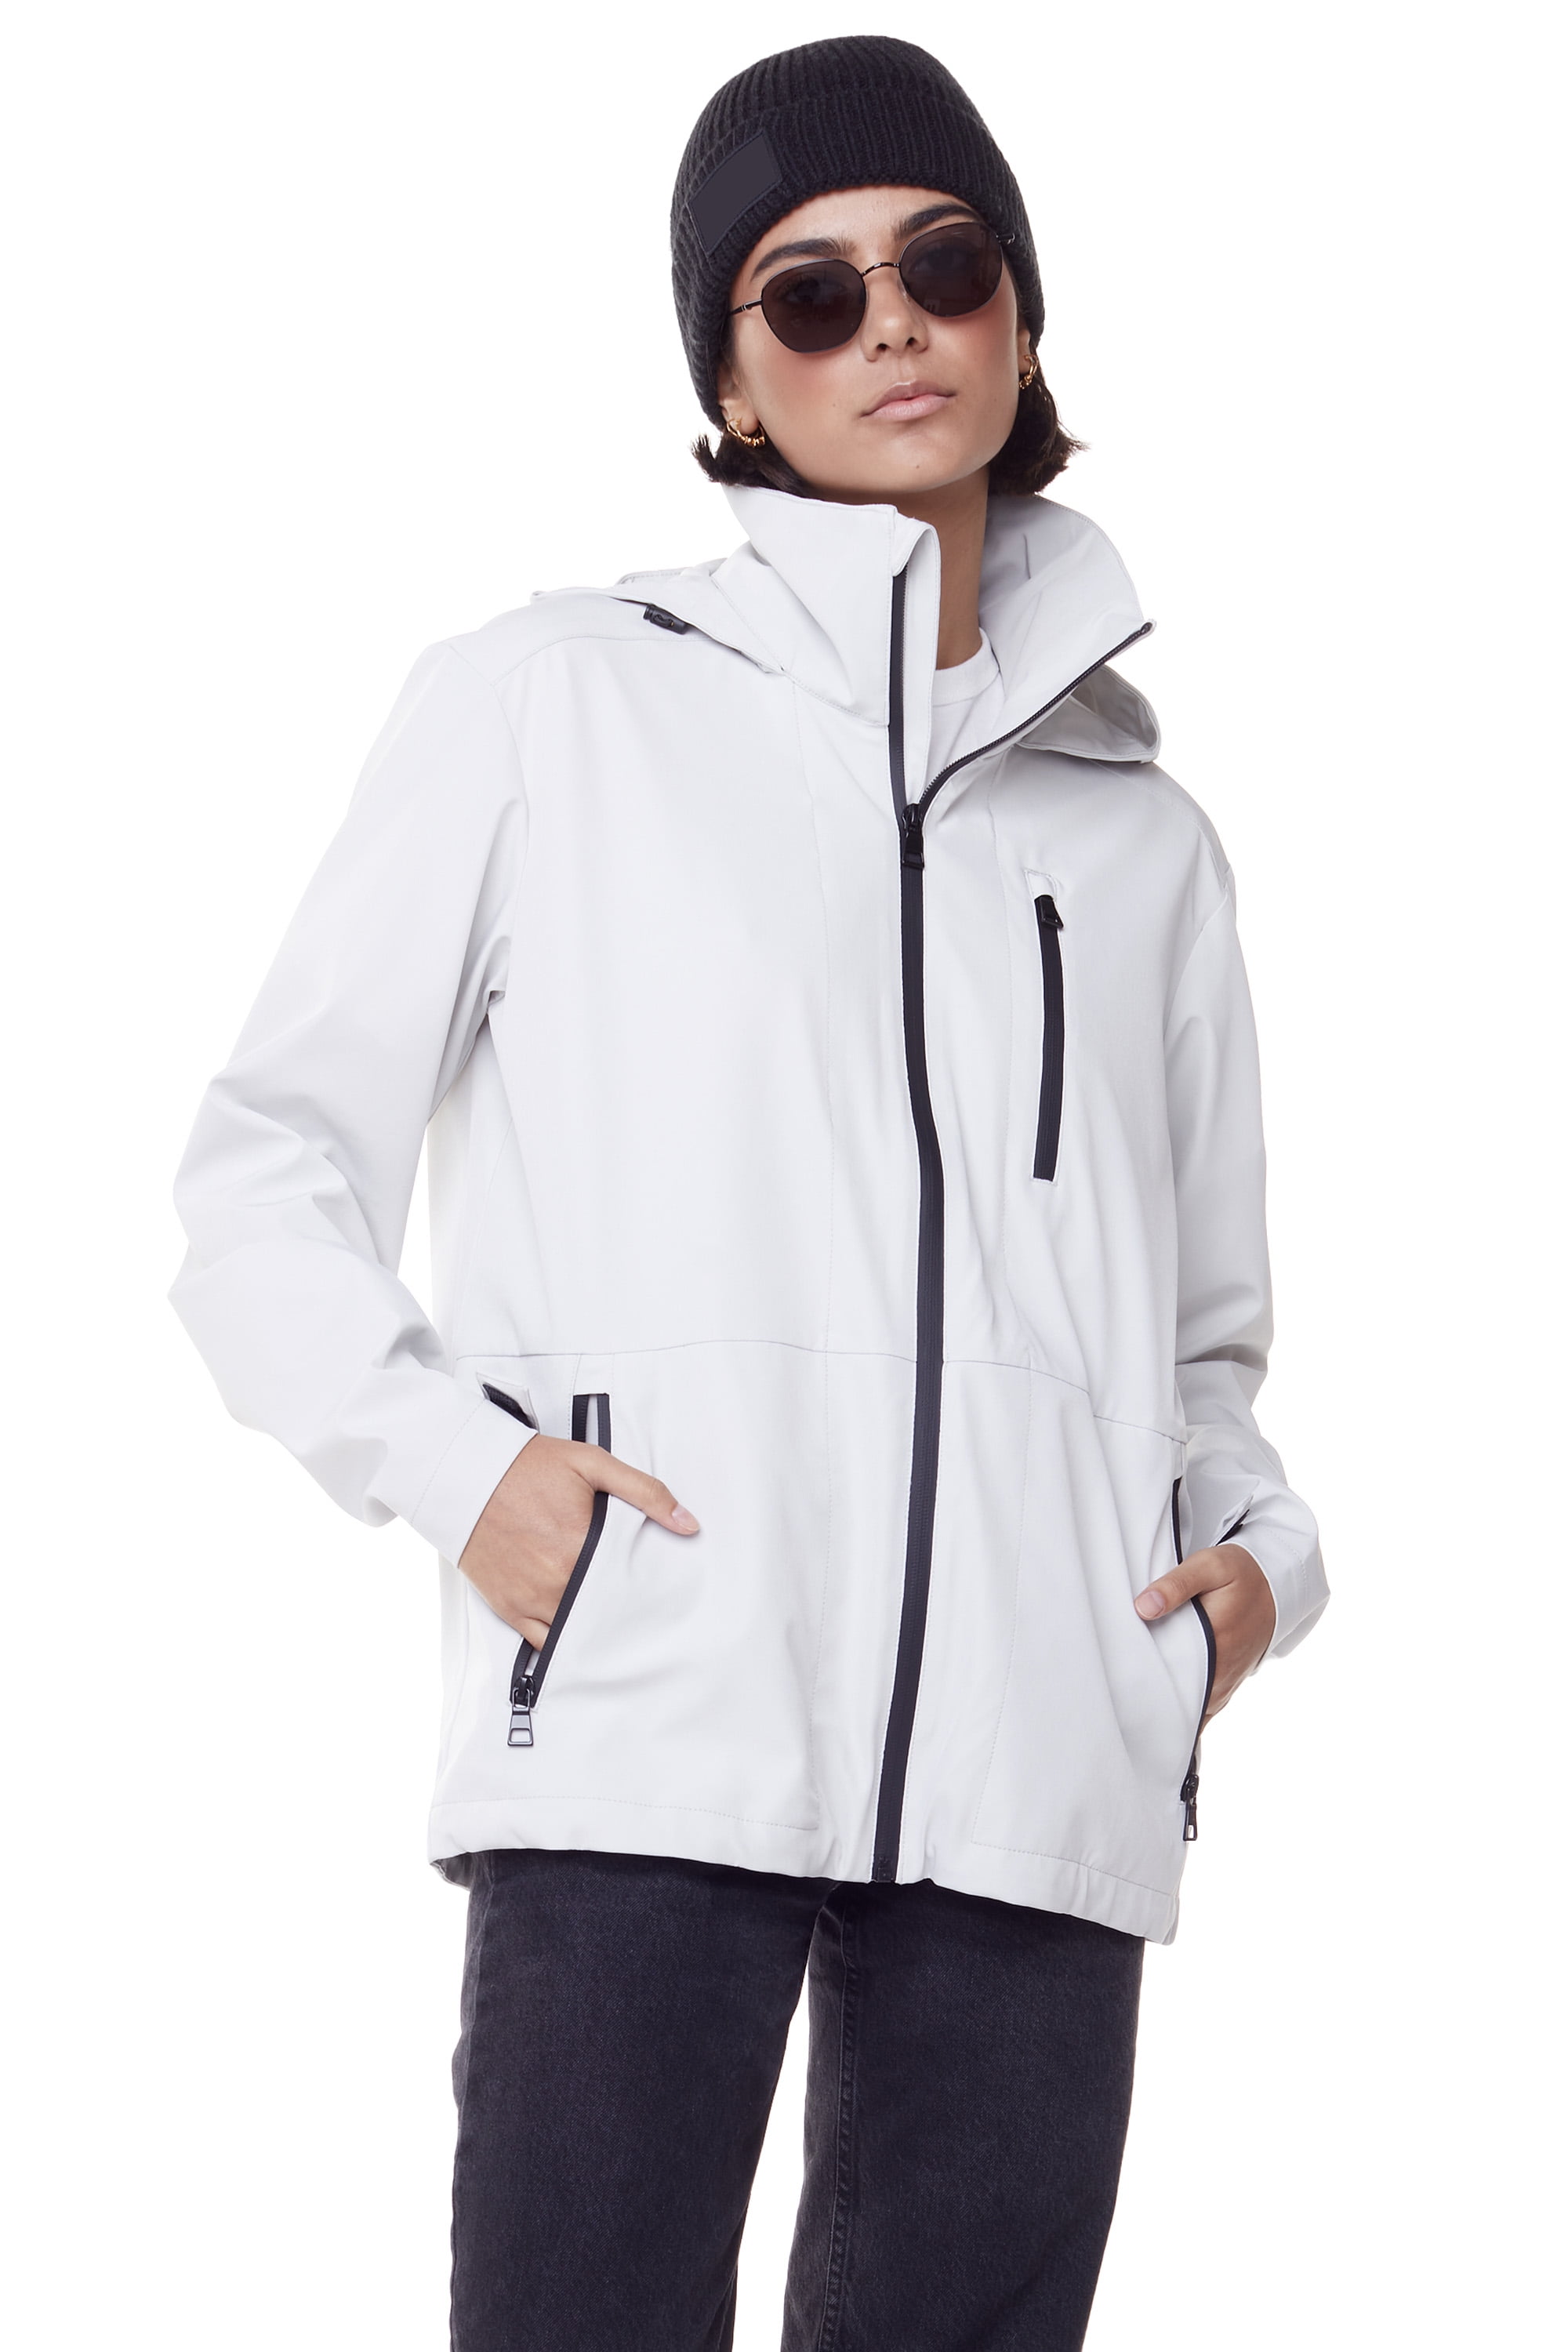 Deskundige Vriend straal Alpine North Unisex Rain Shell - Midweight, Relaxed Fit - Water Repellent &  Wind Resistant Recycled Jacket For Men & Women - Walmart.com